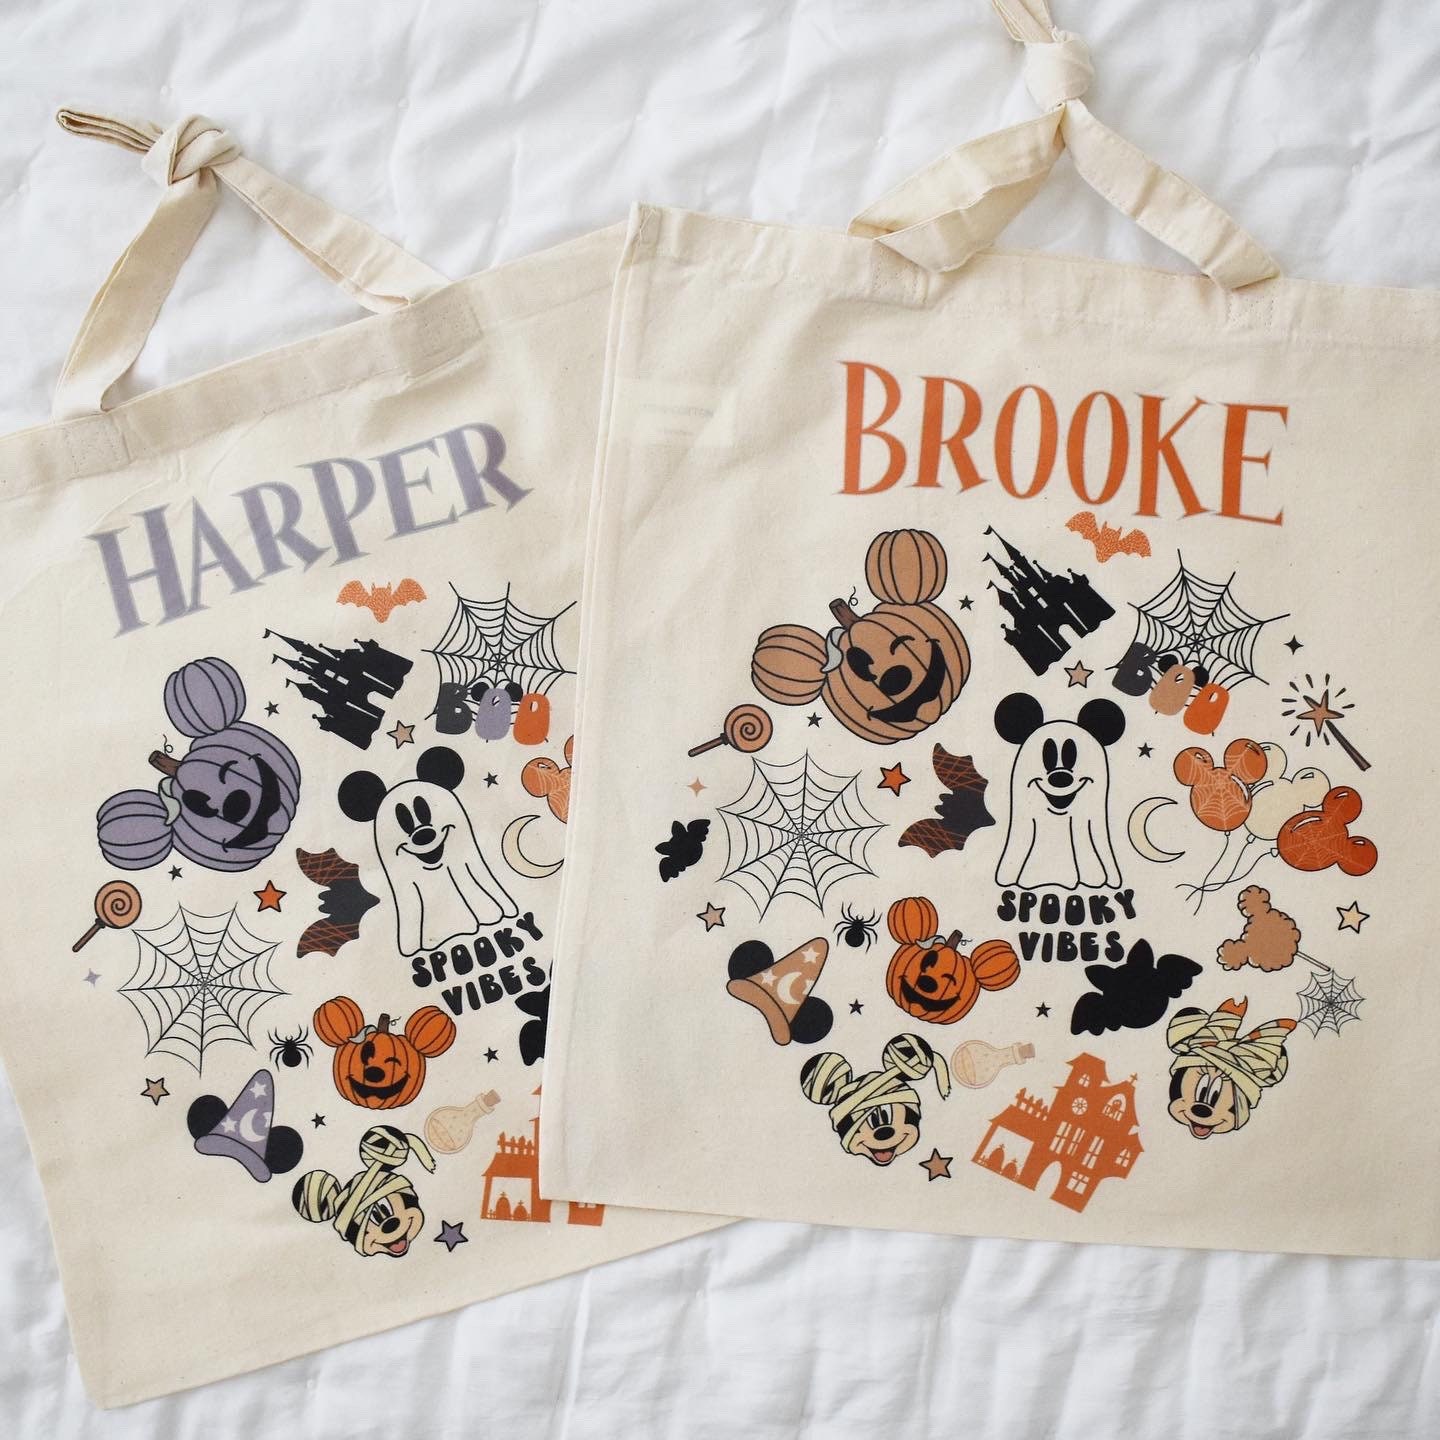 Disney Stitch Gimme Candy Spooky Halloween Tote Bag